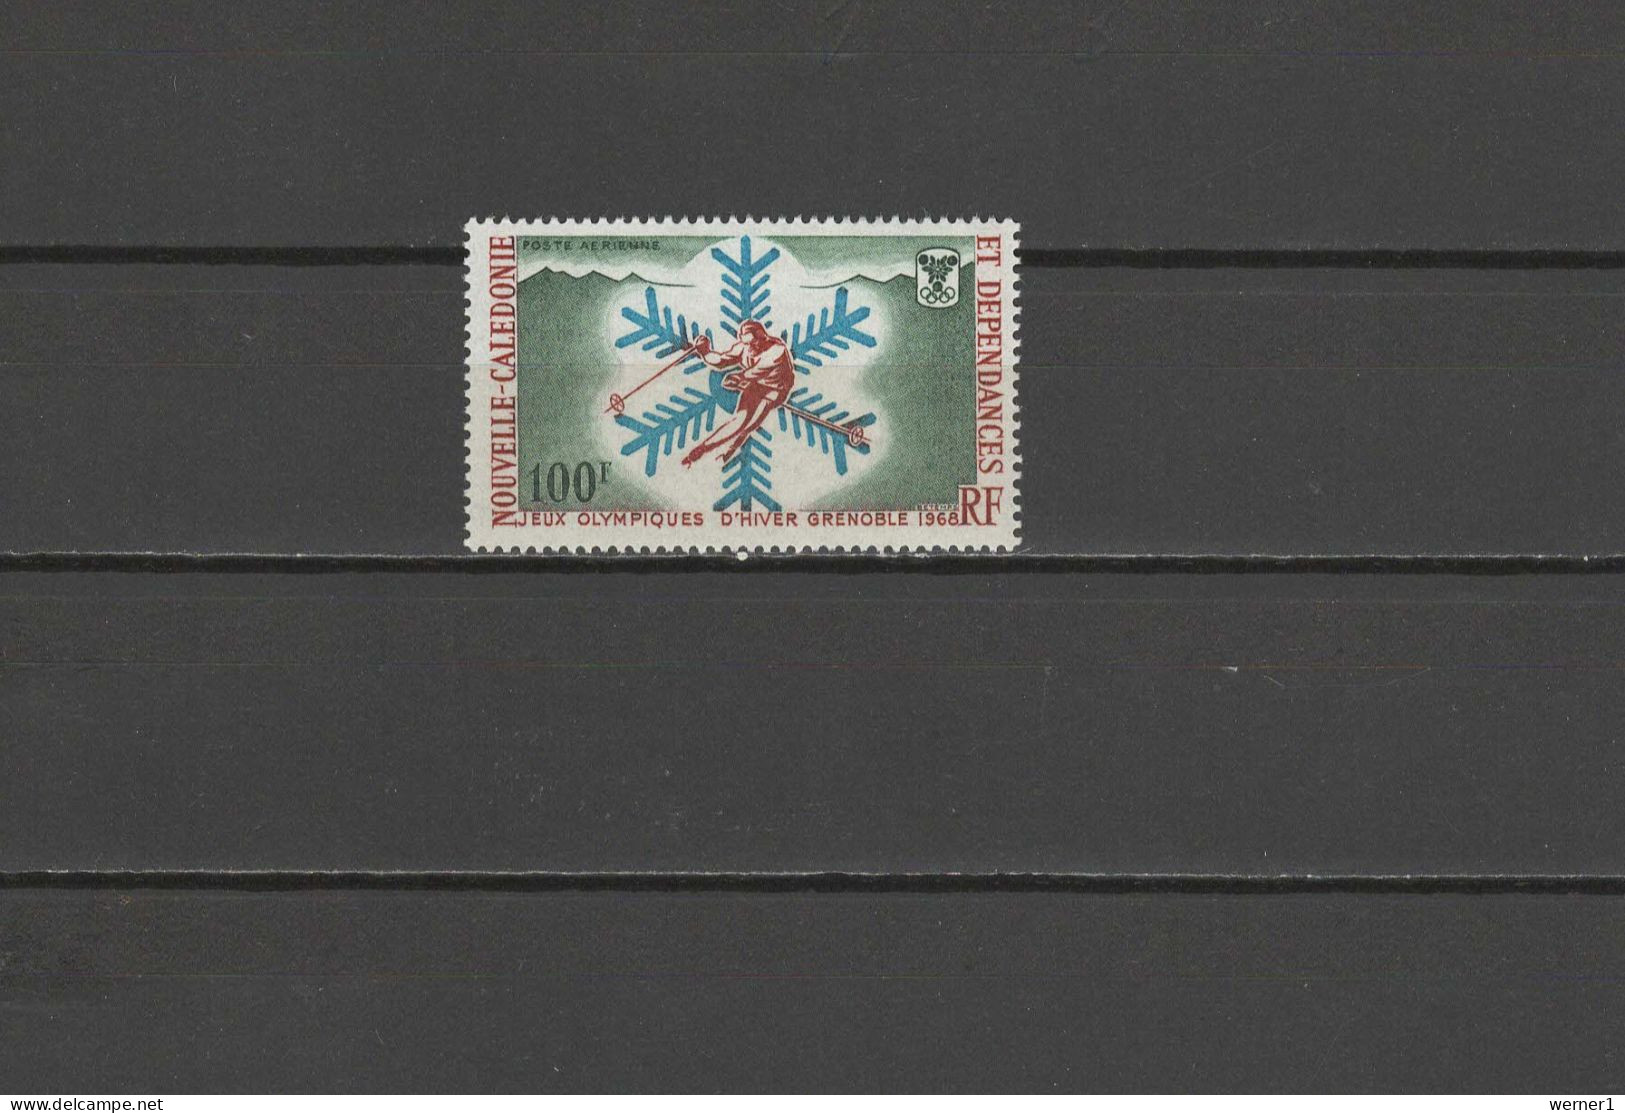 New Caledonia 1967 Olympic Games Grenoble Stamp MNH - Hiver 1968: Grenoble